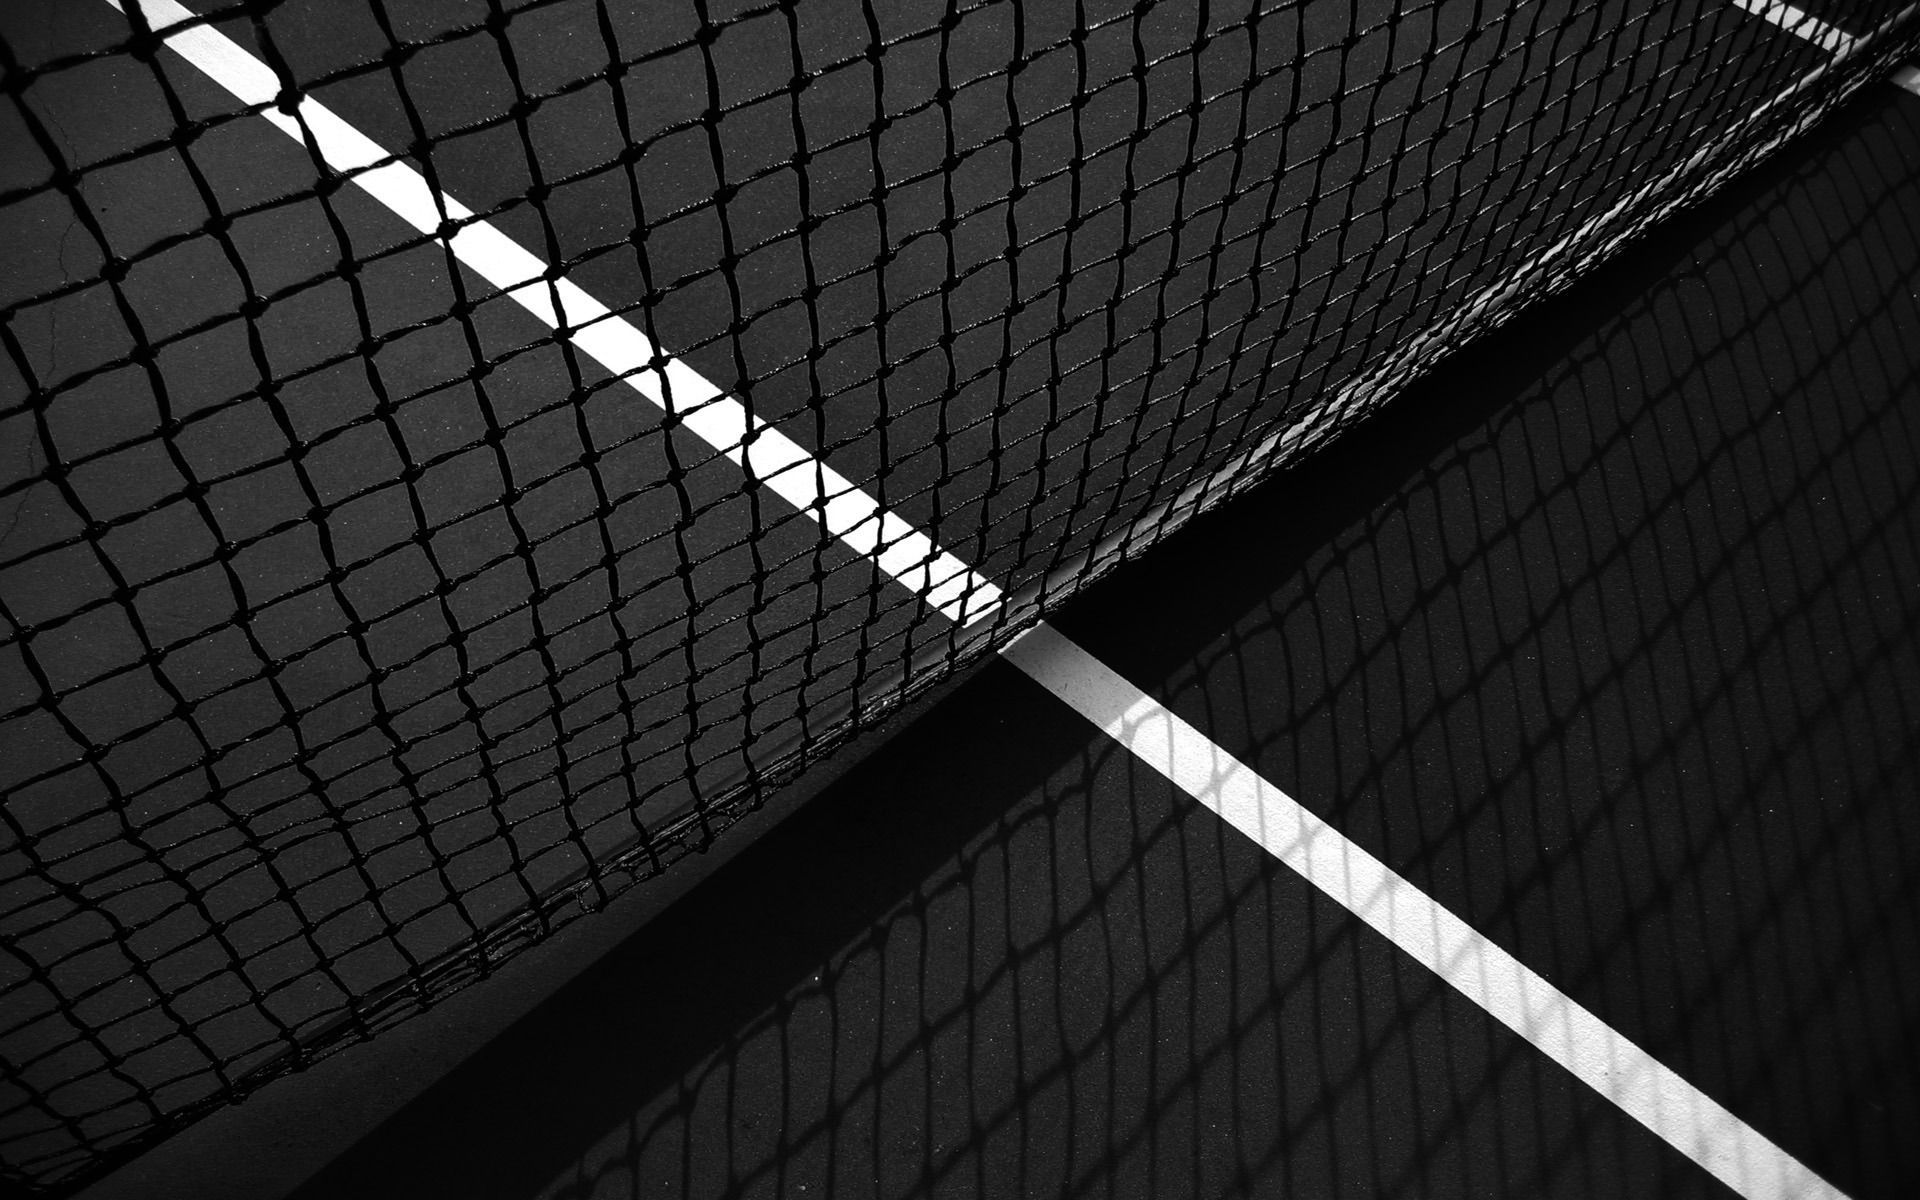 A tennis court with a net and a white line - Tennis